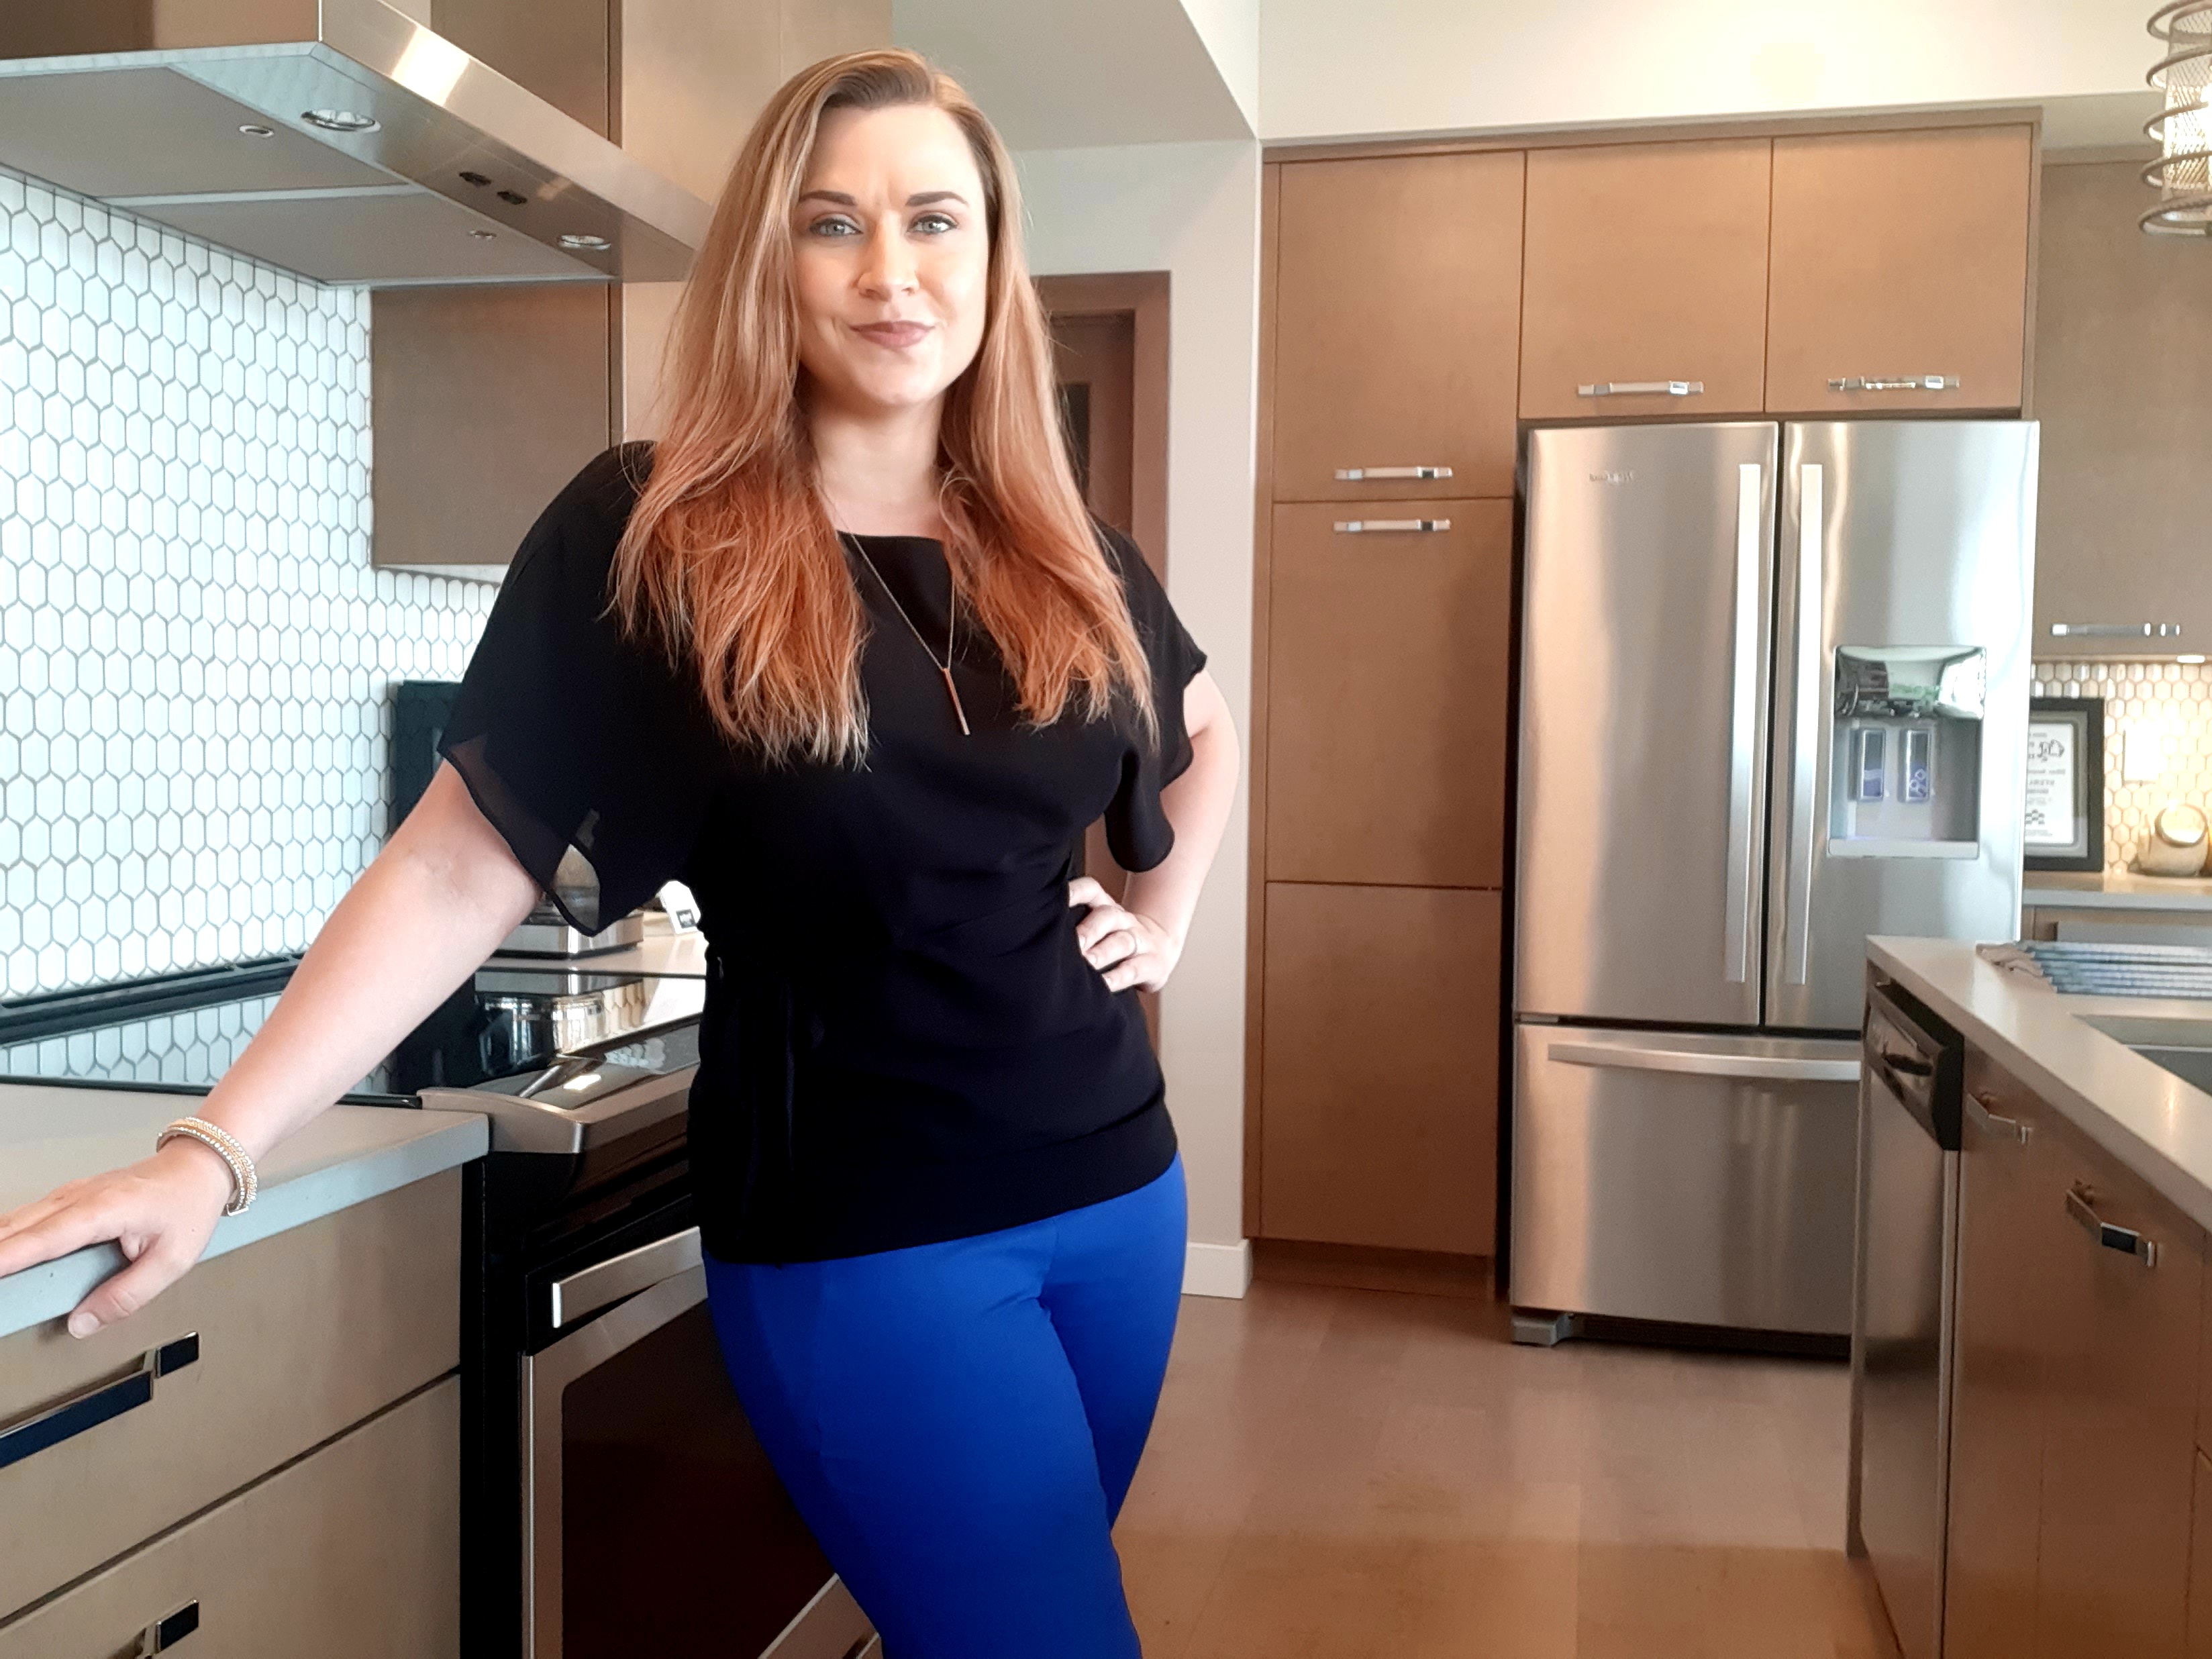 Courtney standing in the kitchen of a new home. 